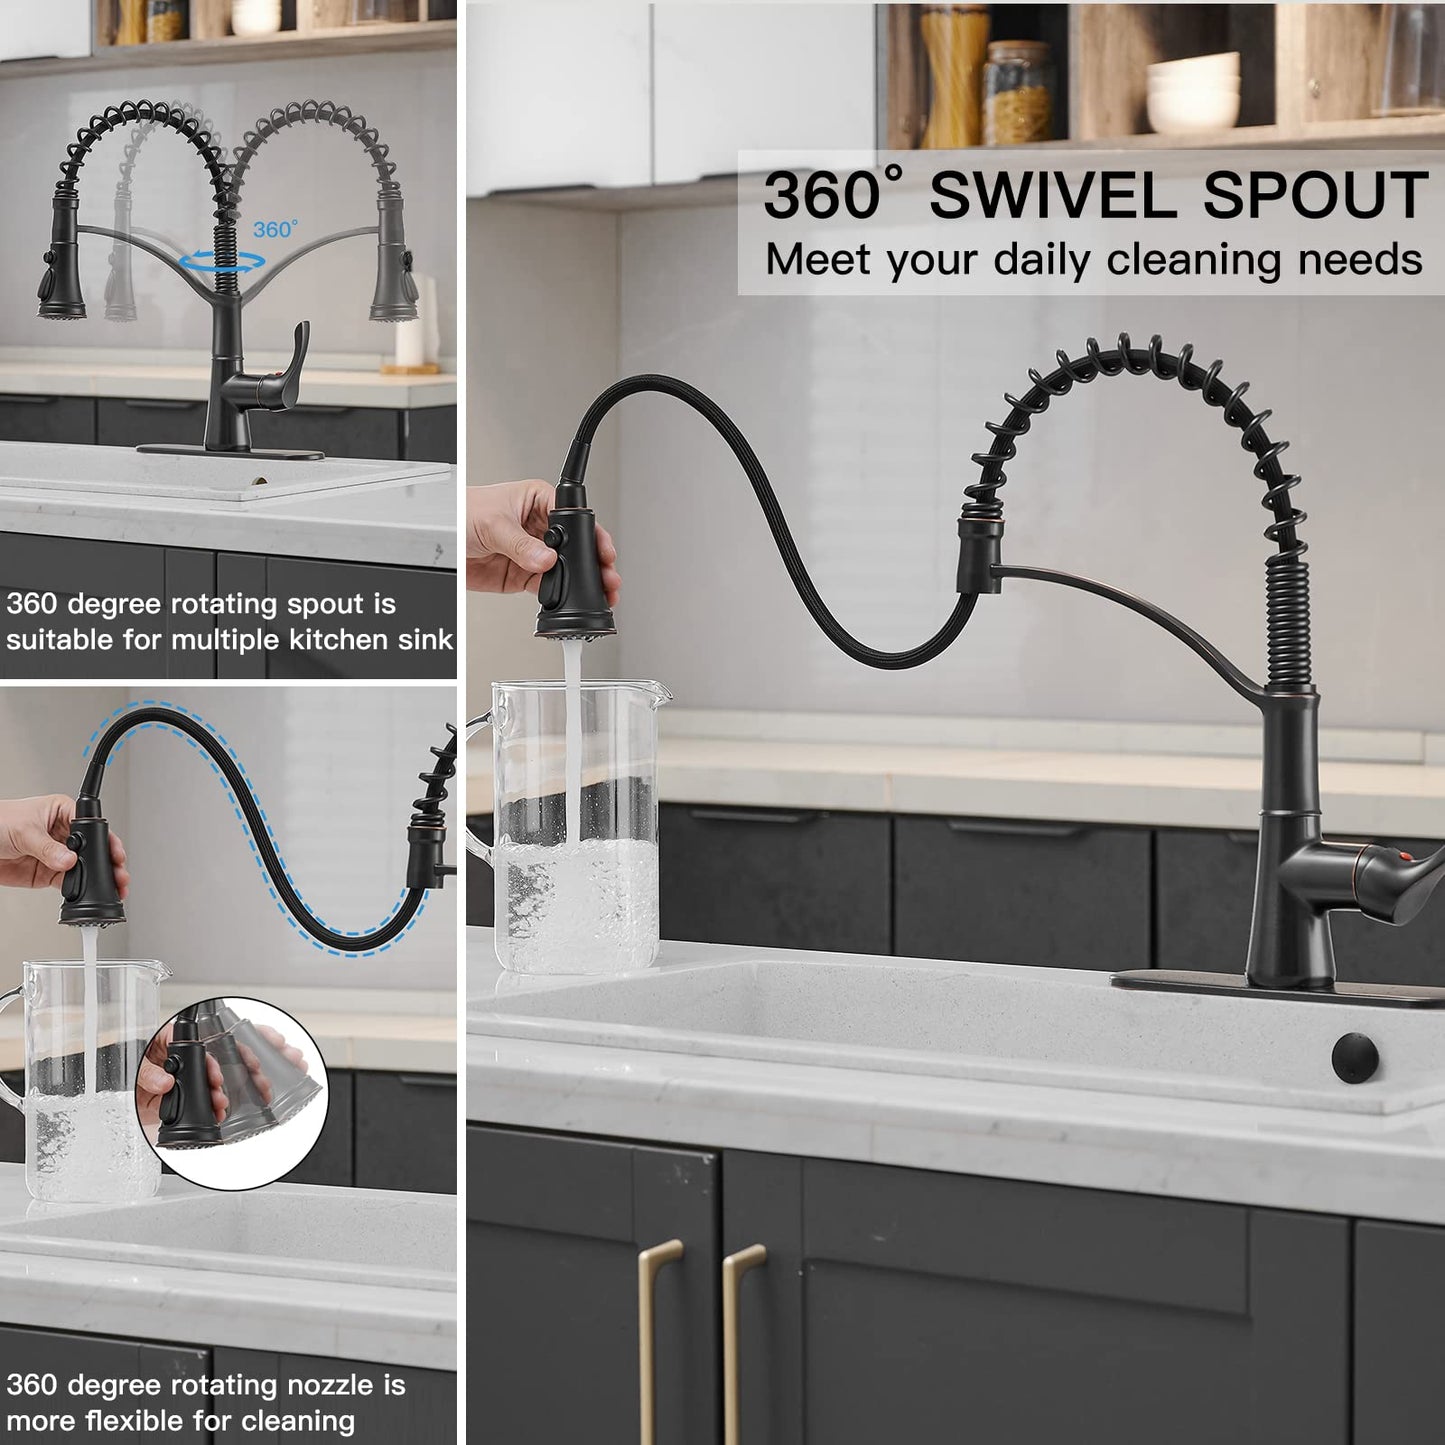 3 Spray High Arc Pull Down Kitchen Faucet Oil Rubbed Bronze - buyfaucet.com